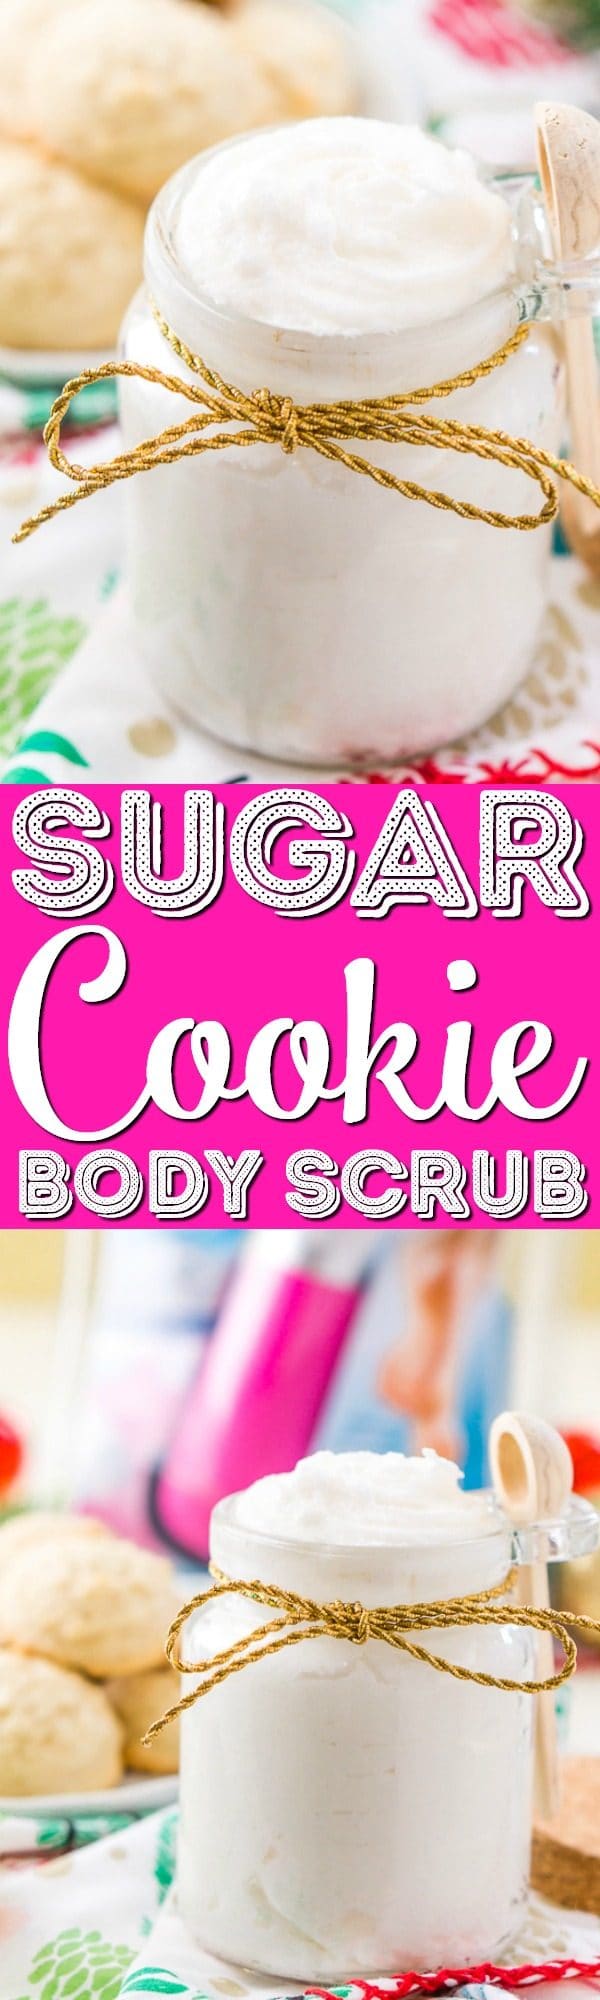 This Sugar Cookie Body Scrub is made with sugar, coconut oil, and fragrance oil. You'll love how easily this 3-ingredient DIY gift comes together! 